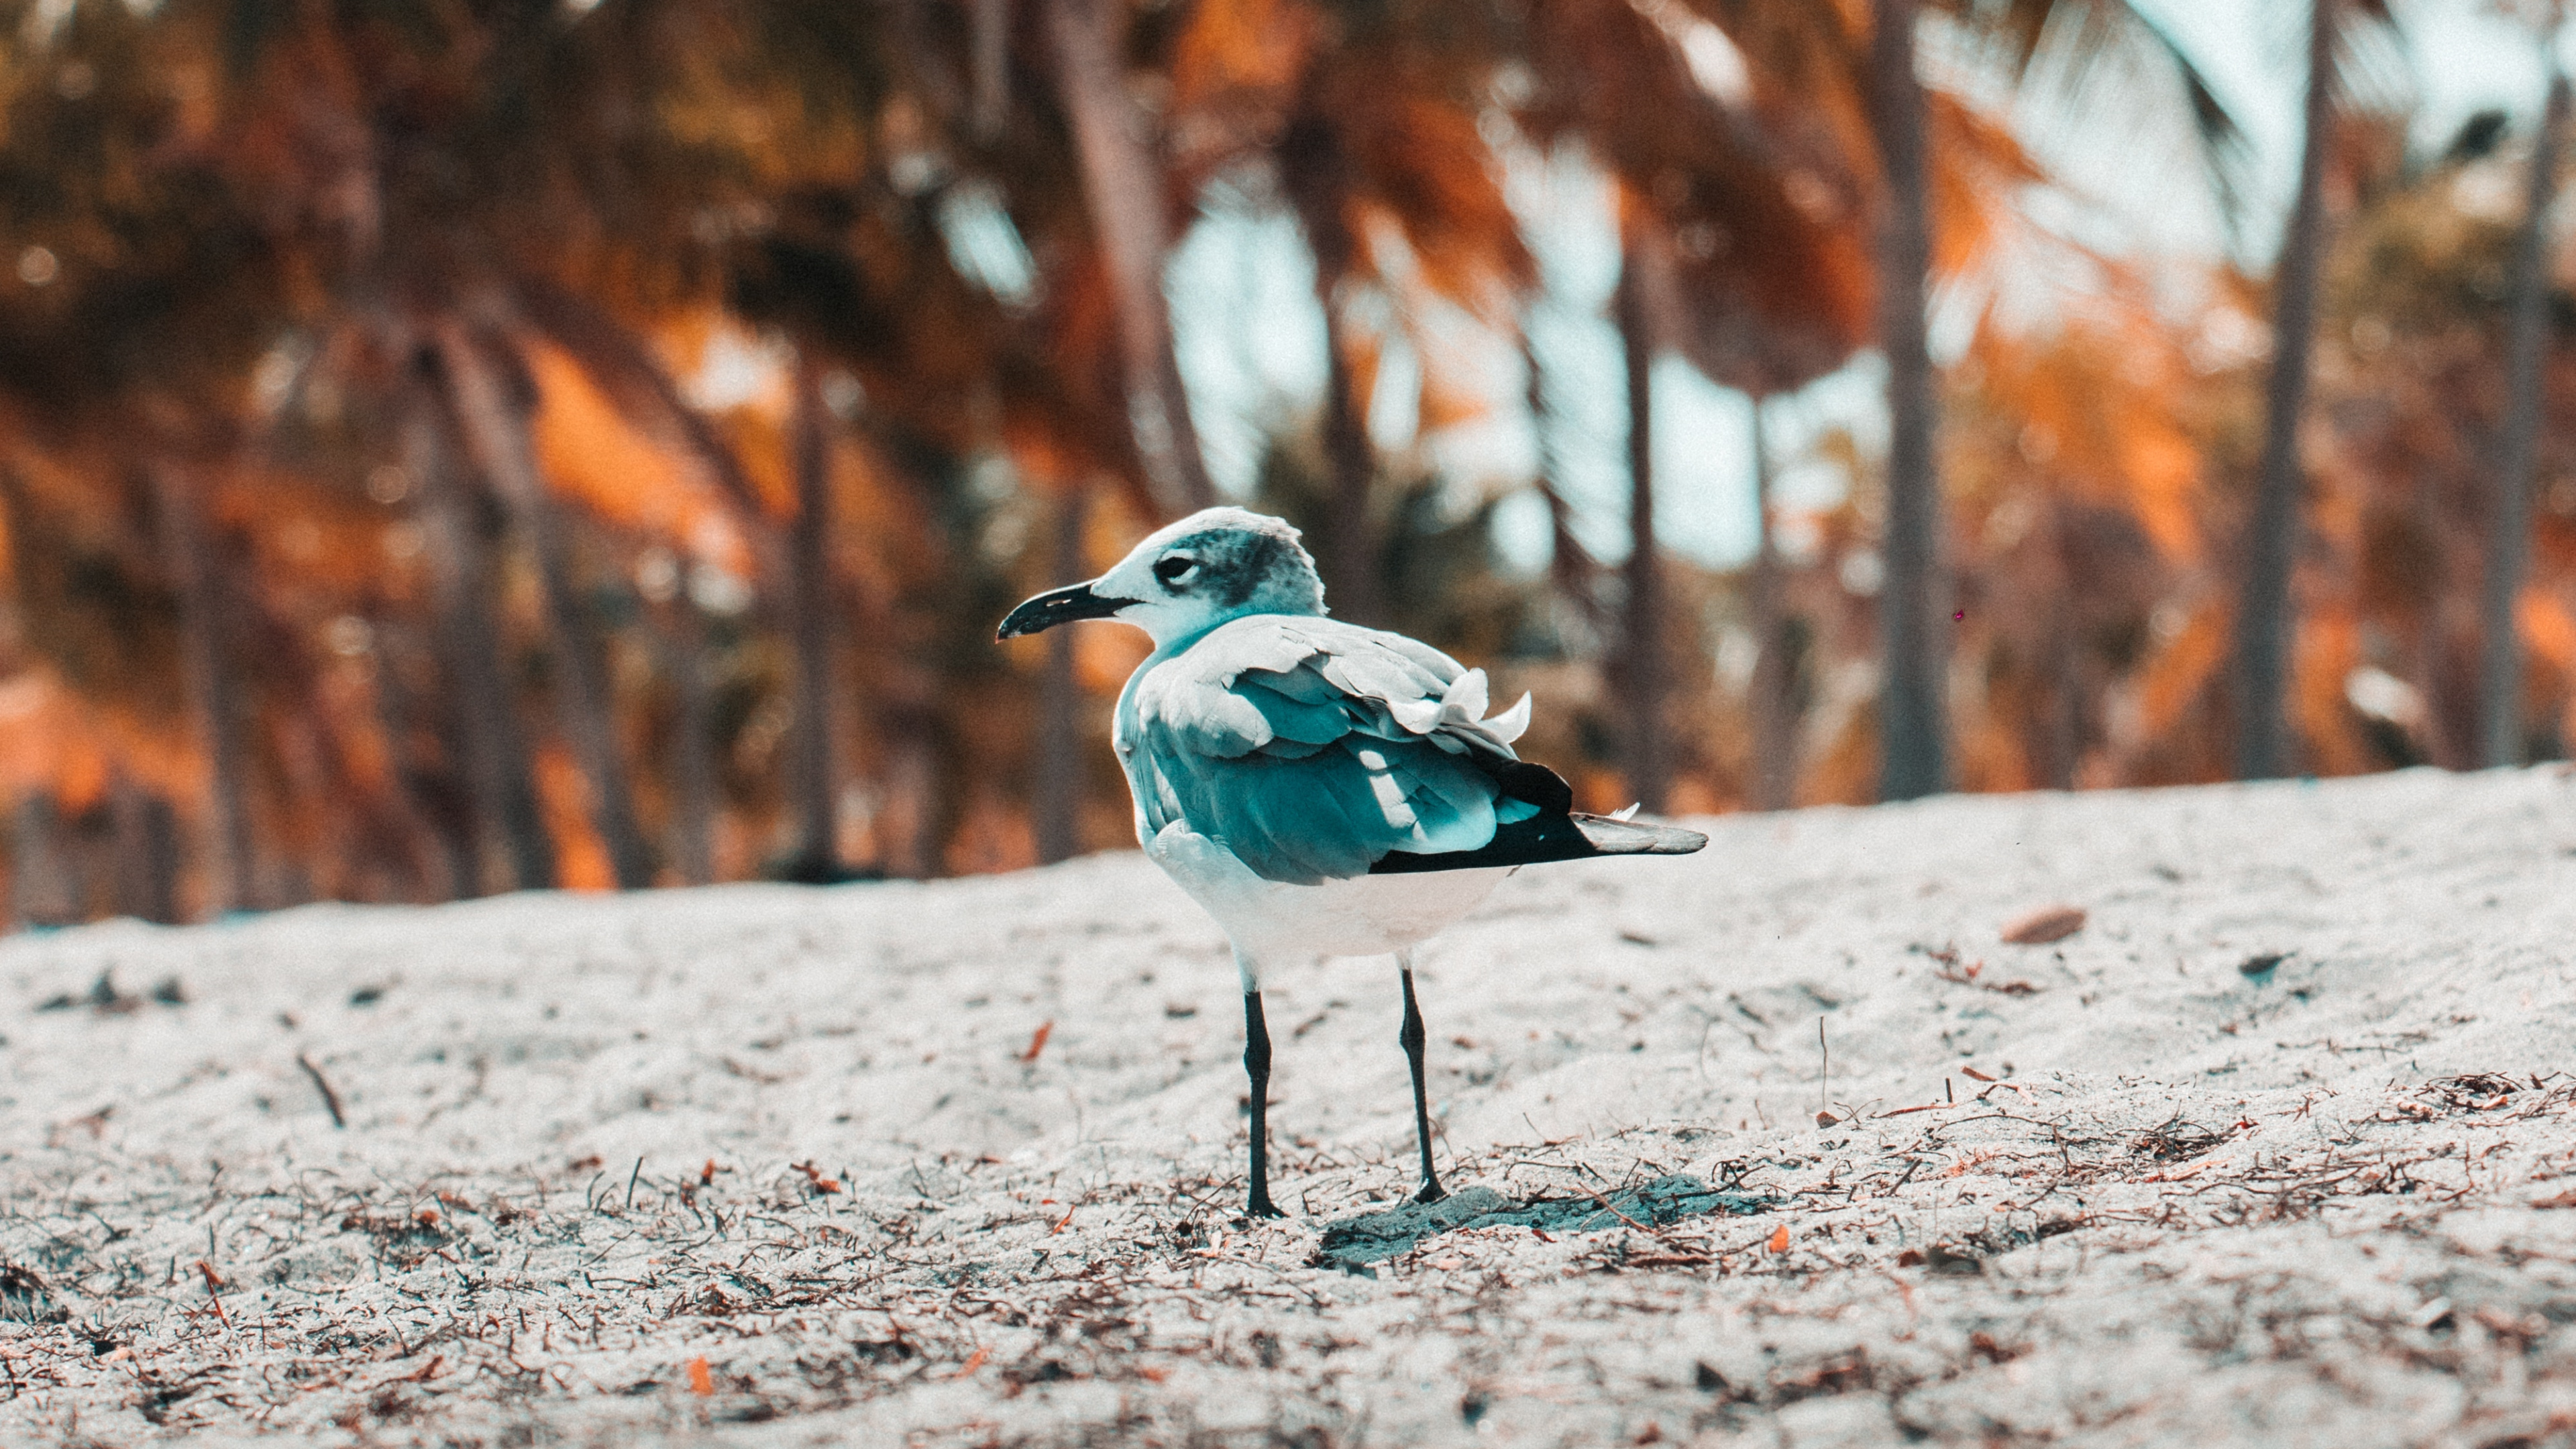 Blue and White Bird on Gray Sand During Daytime. Wallpaper in 3840x2160 Resolution